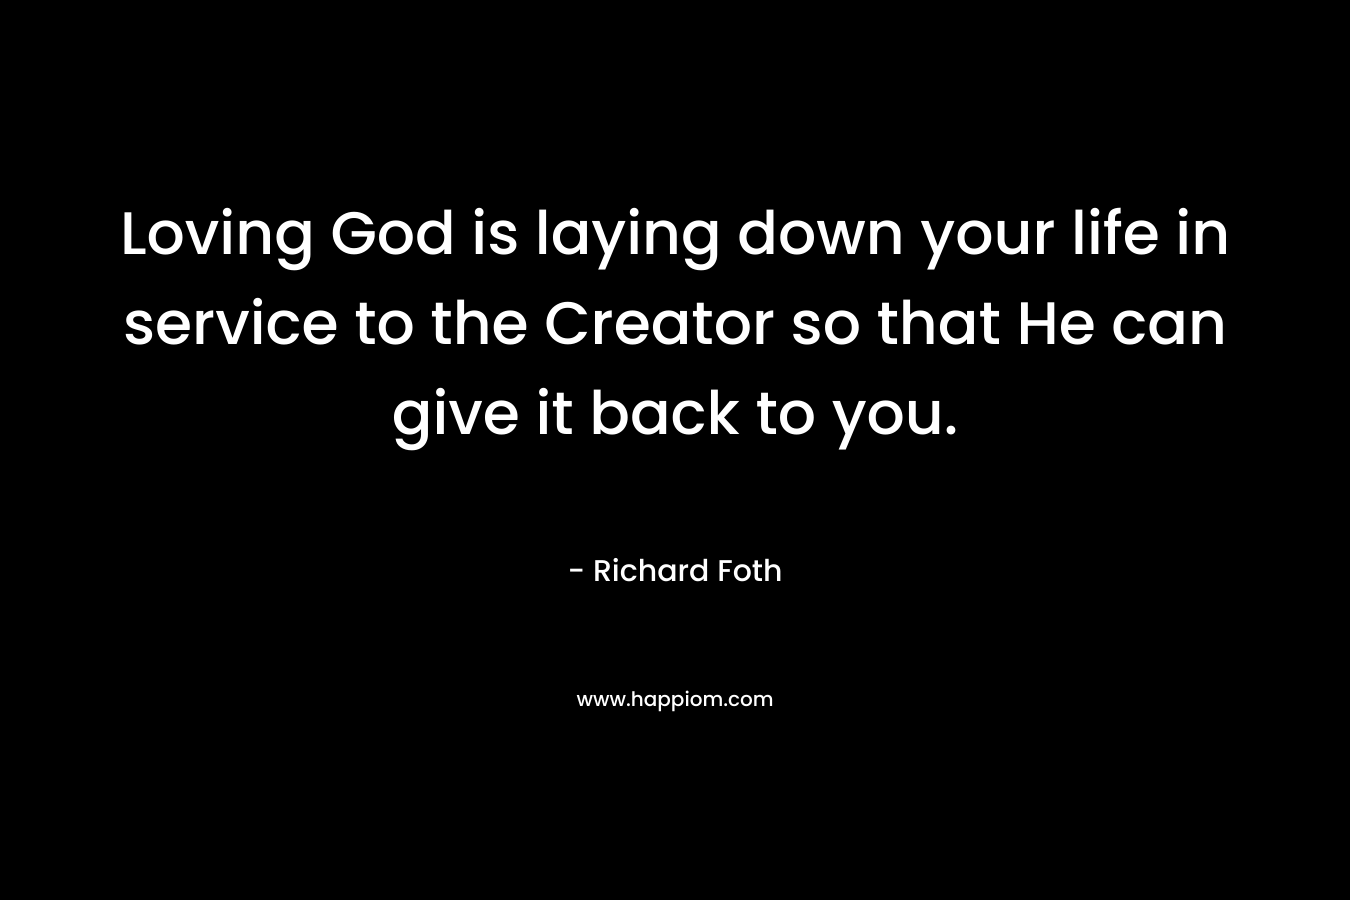 Loving God is laying down your life in service to the Creator so that He can give it back to you. – Richard Foth